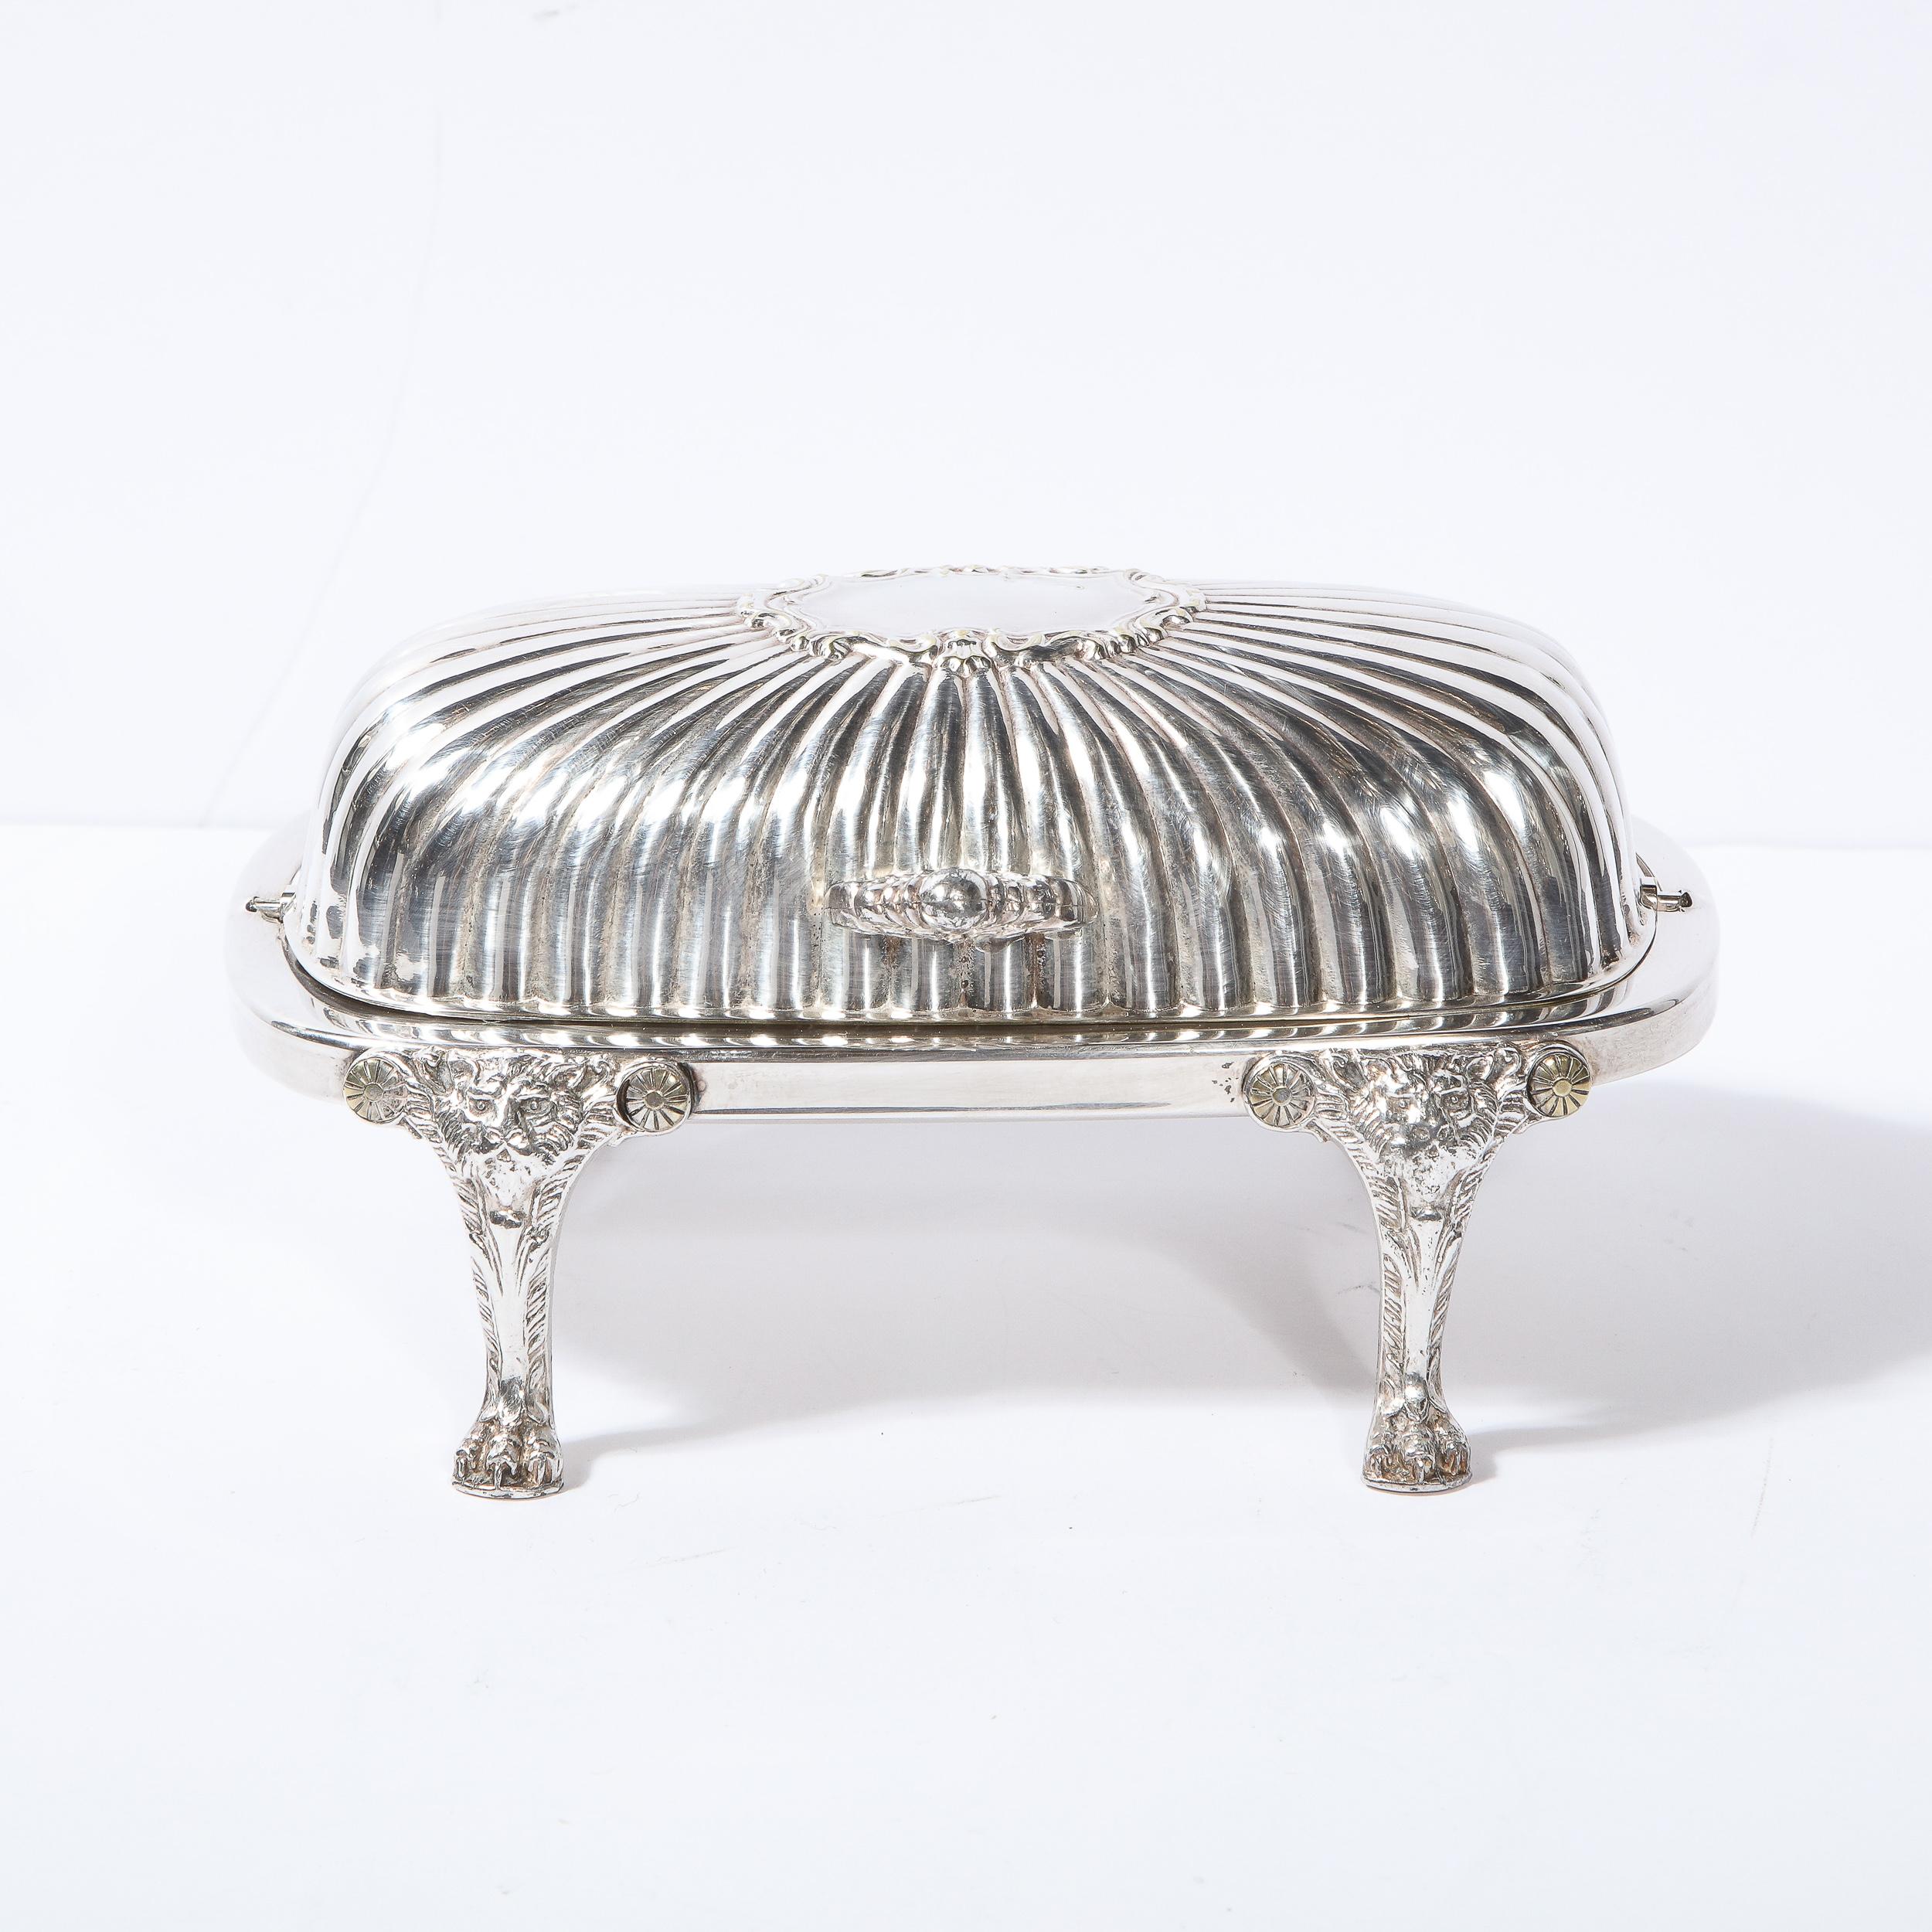 This elegant Mid-Century Modern silver plate butter dish was realized in the United States, circa 1950. It offers four claw form feat with stylized lions at their apex; a rectangular body with rounded corners; a stylized acathus leaf pull; and a